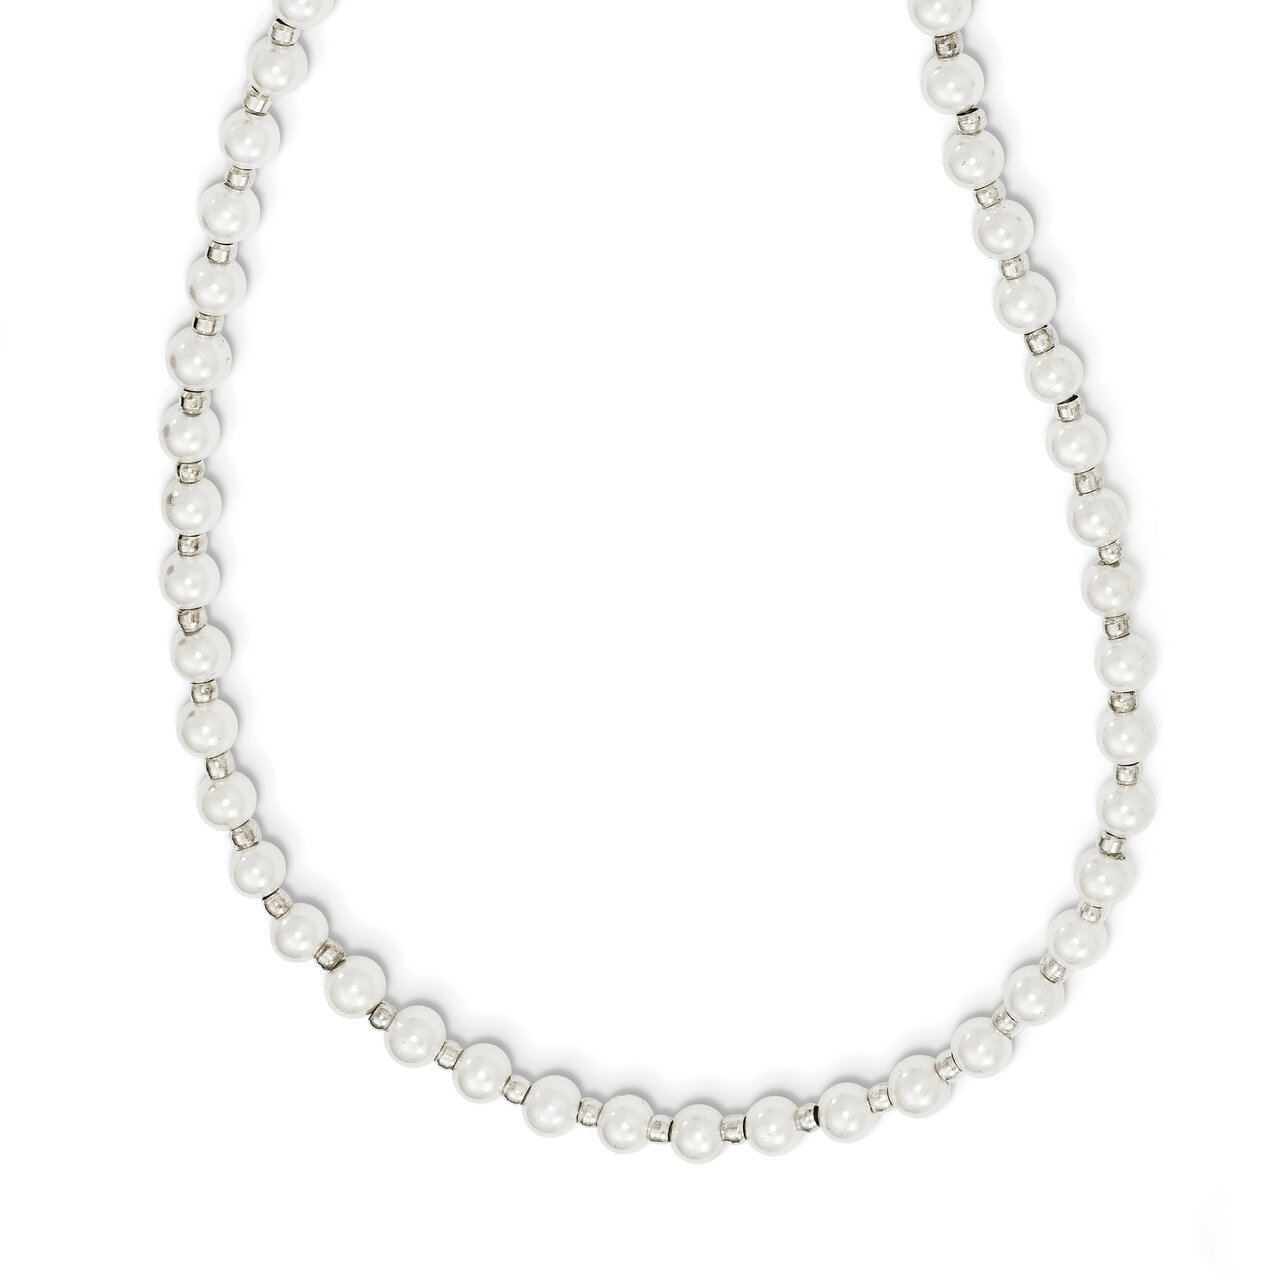 24 Inch 4-5mm White with Glass Bead Optic Chain Freshwater Cultured Pearl QH5318-24